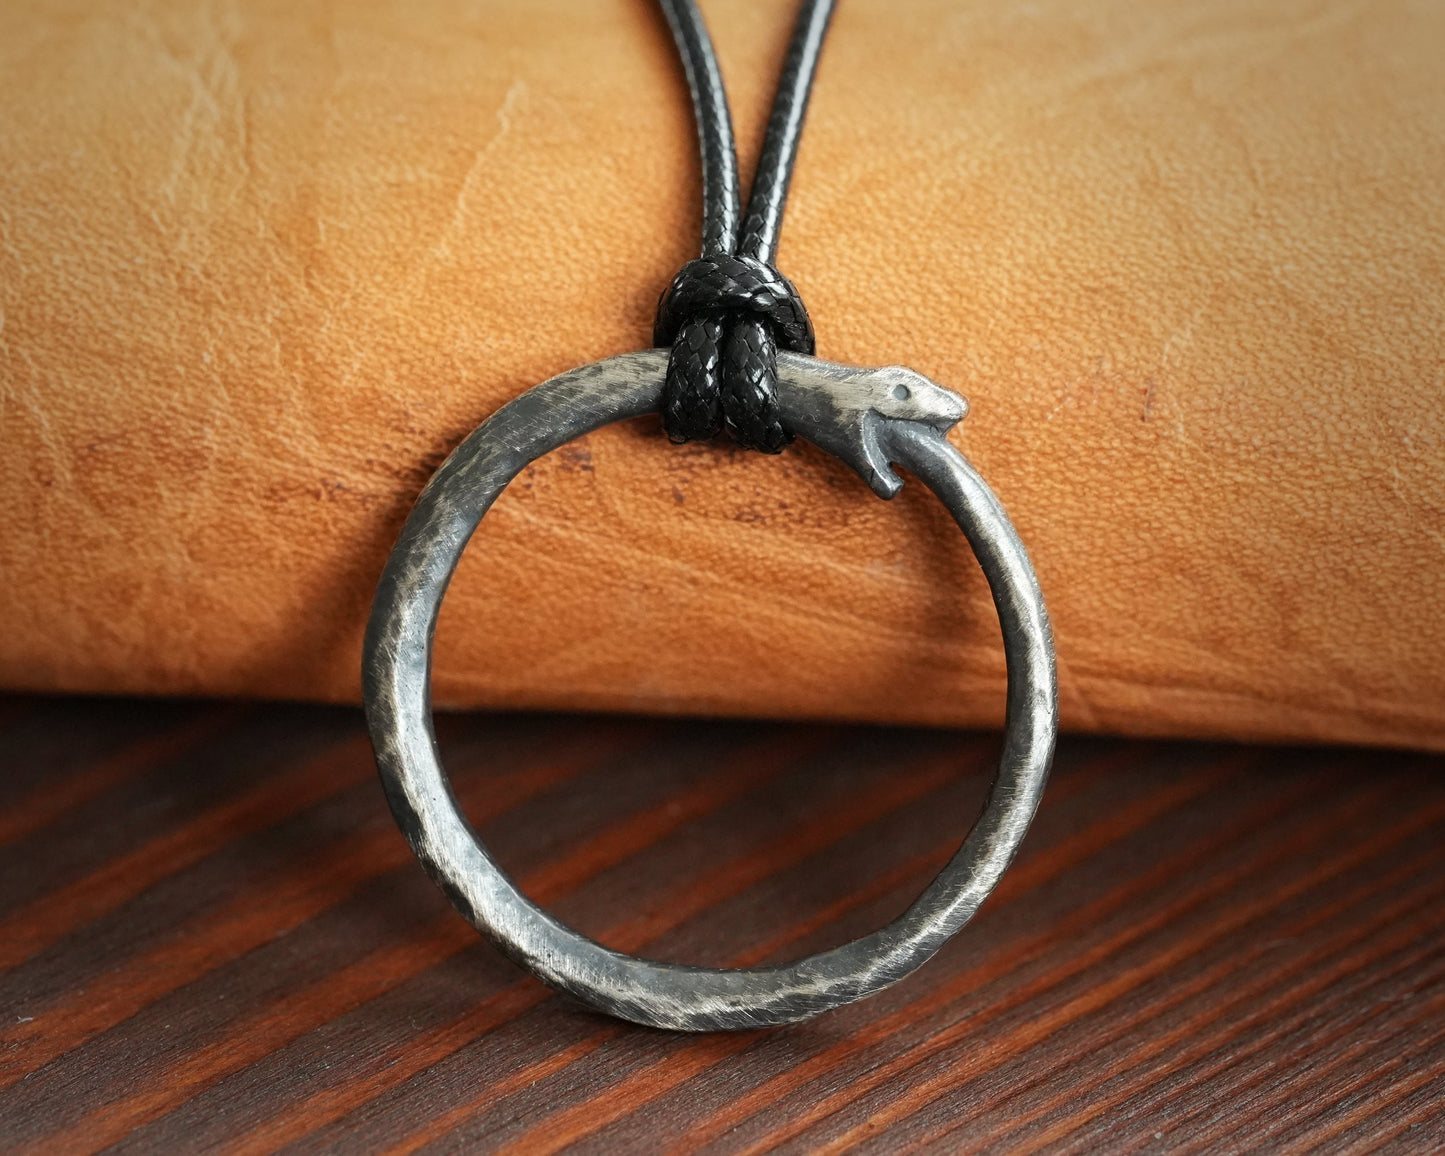 Ouroboros Snake Viper Ring Necklace Pendant Charm 925 Sterling silver Brass - Baldur Jewelry